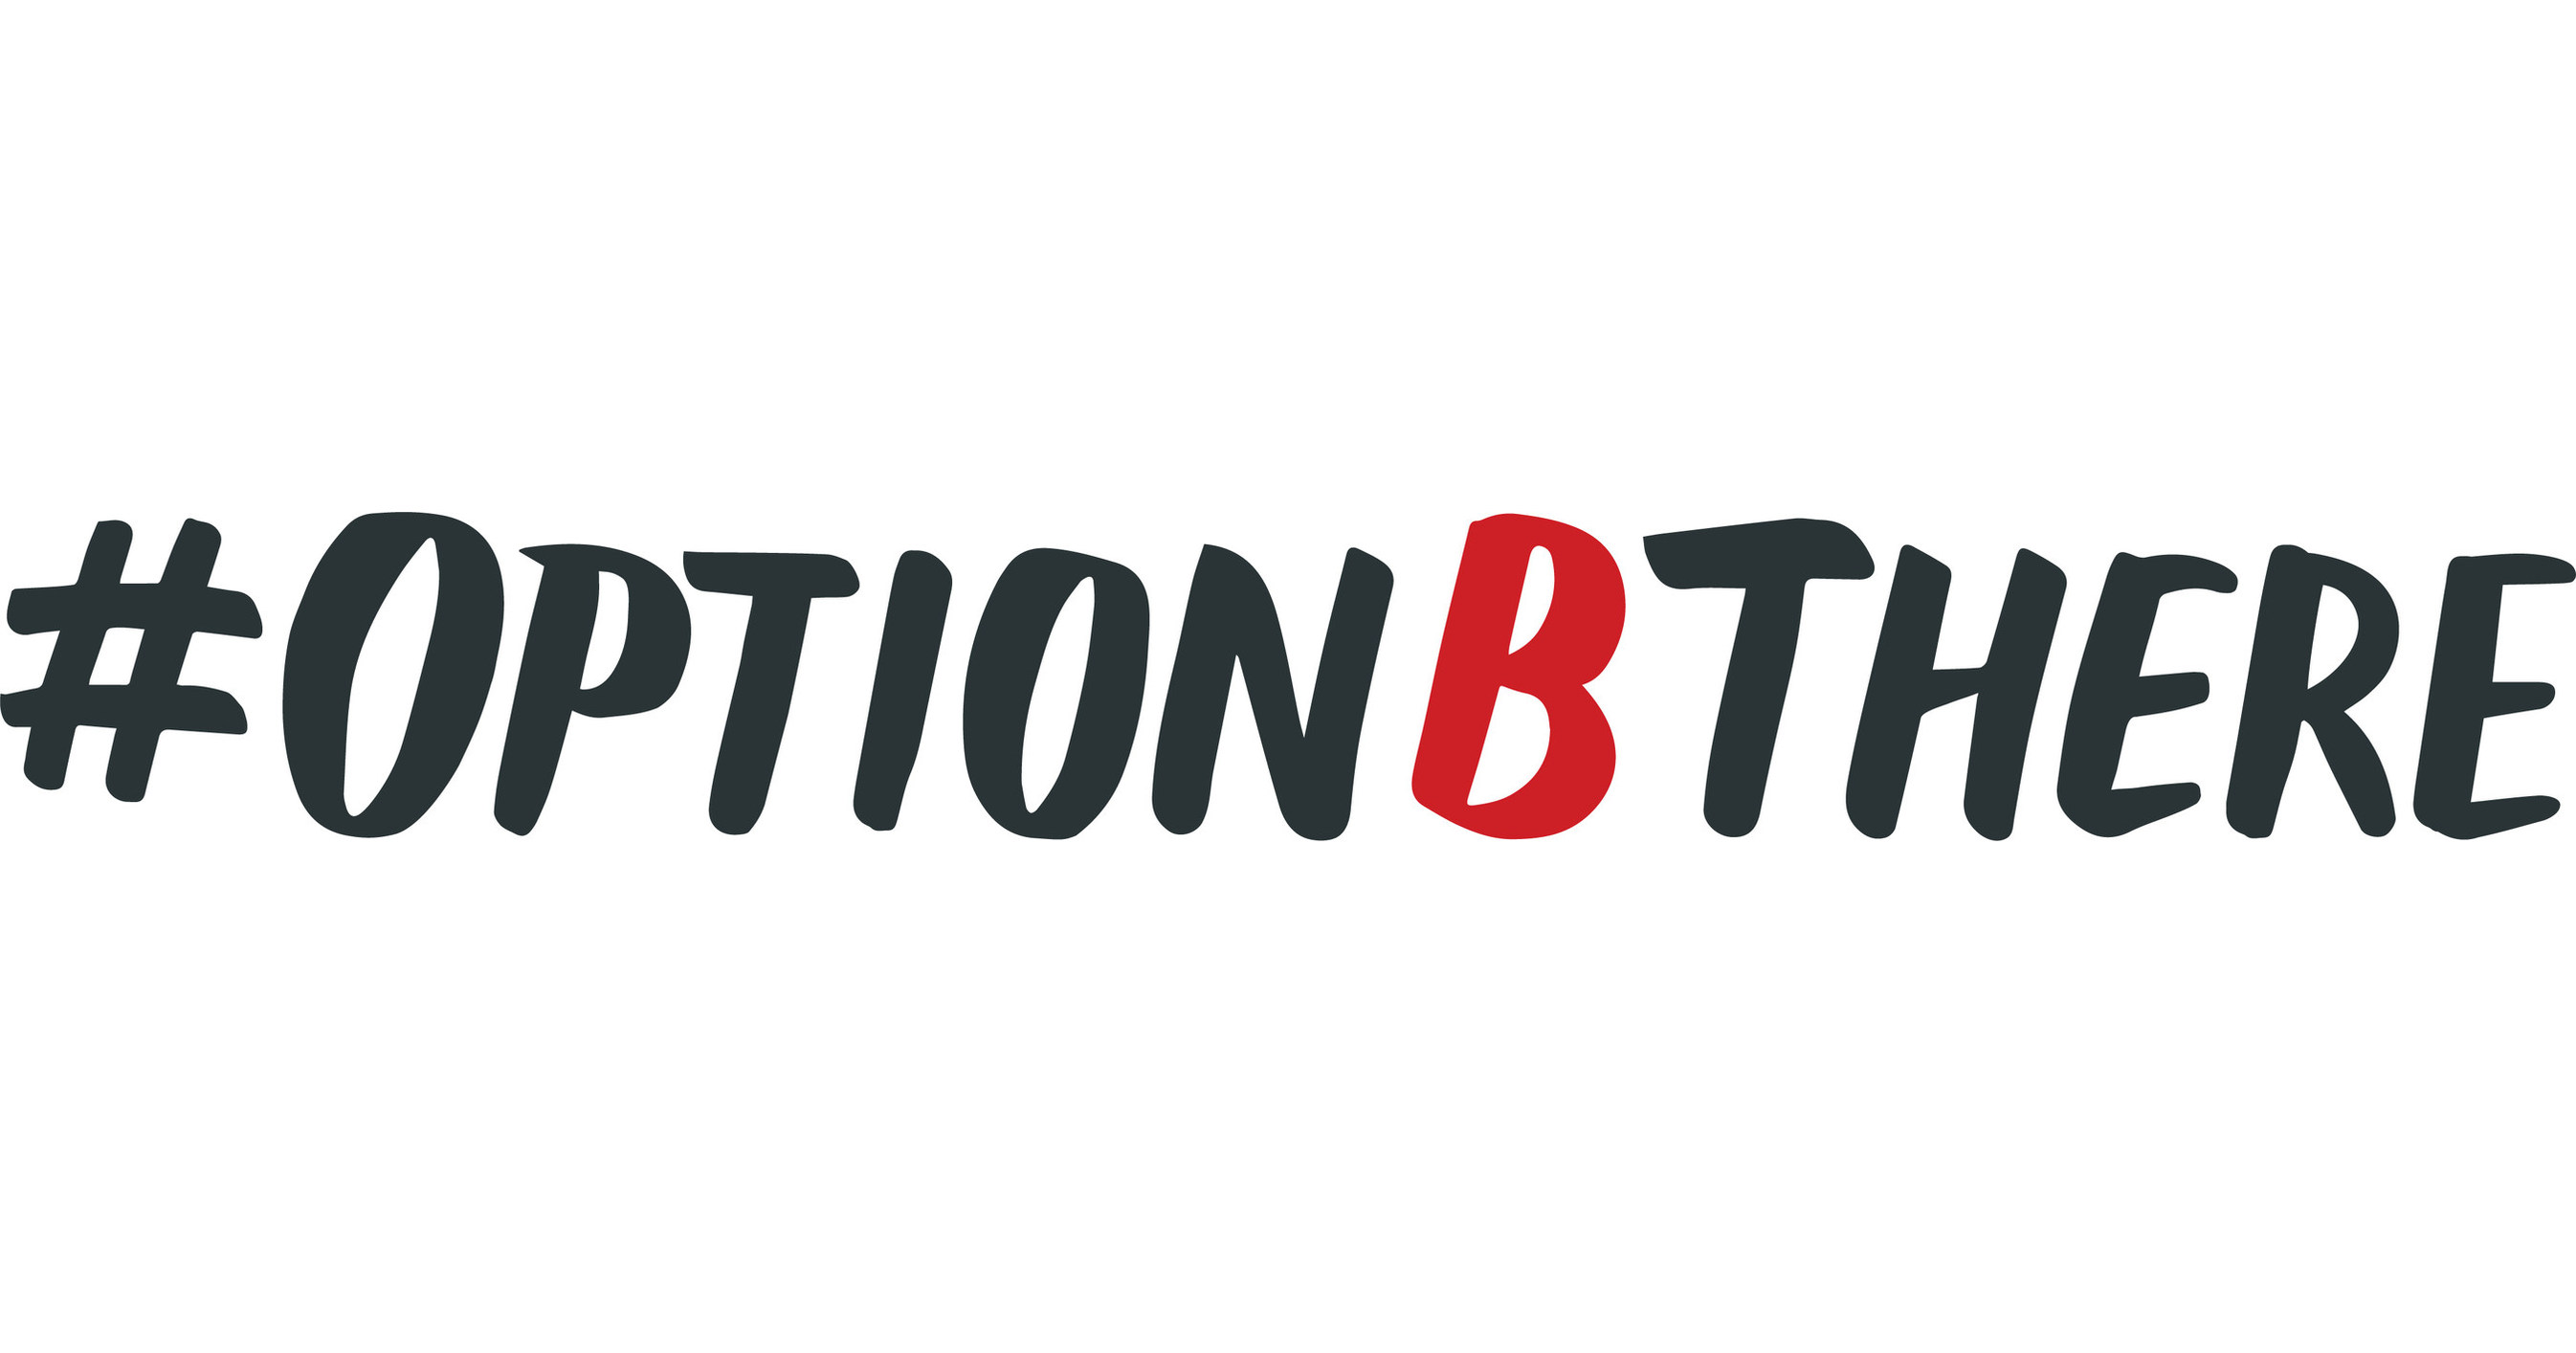 Send an #OptionBThere card showing your support